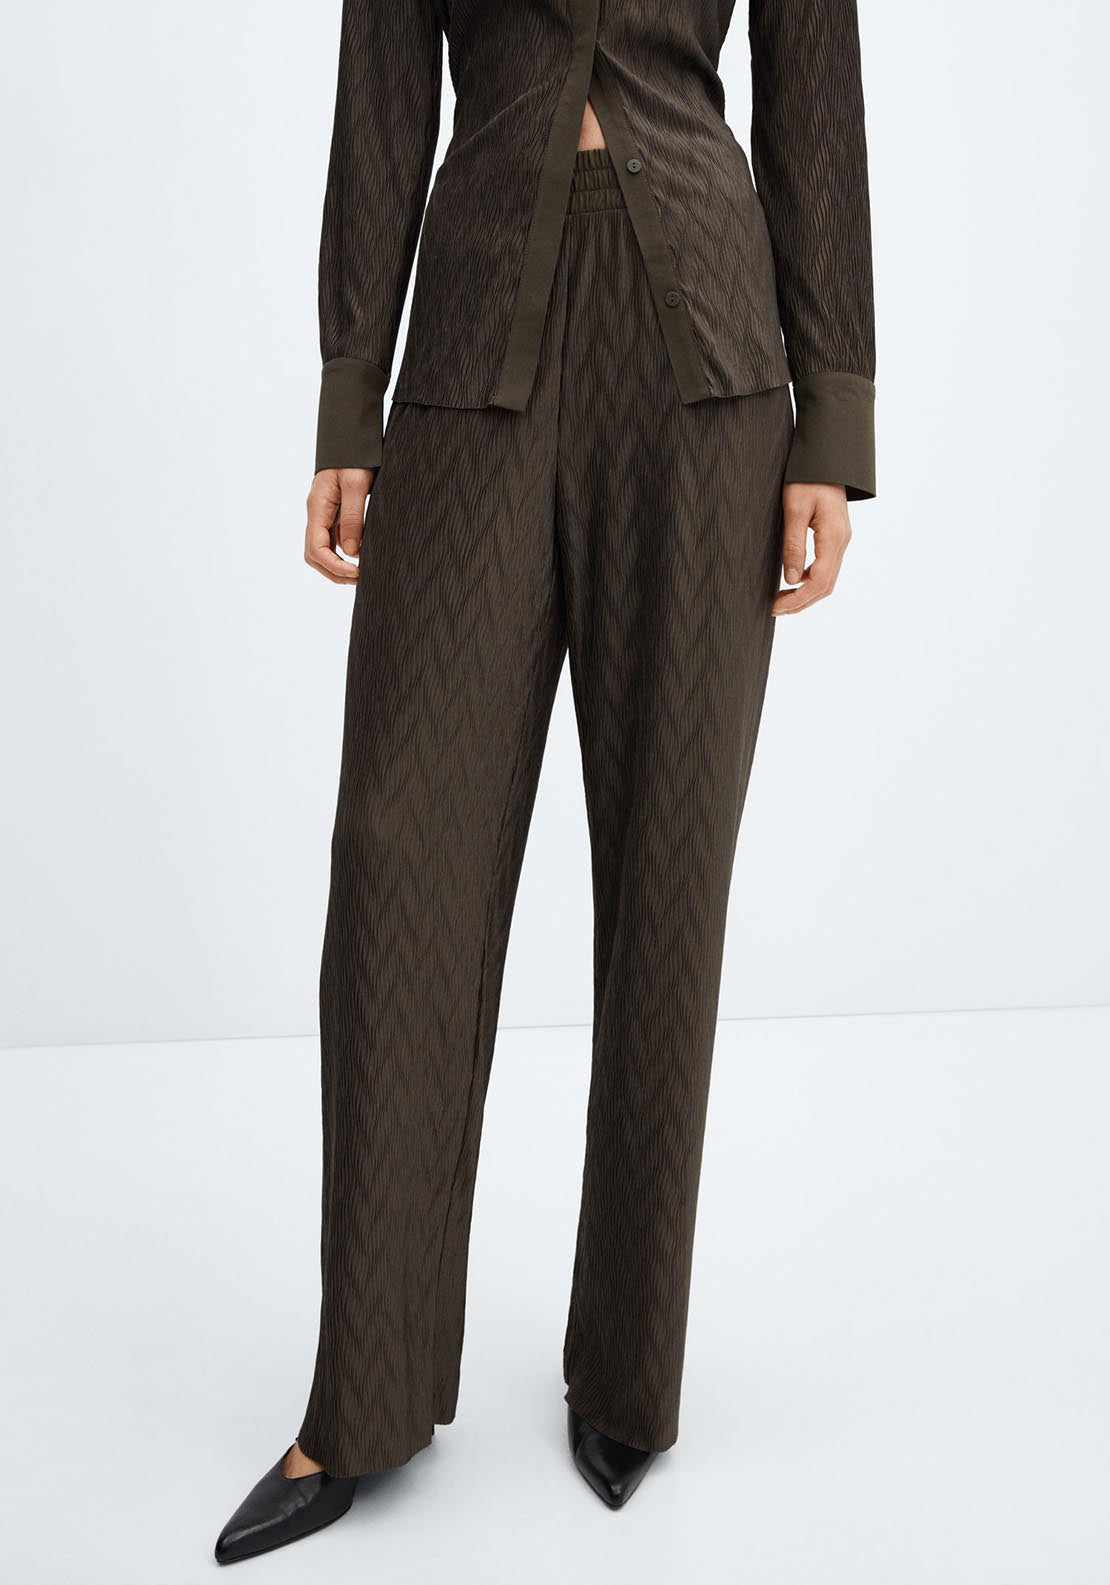 Mango Textured wide leg trousers 2 Shaws Department Stores